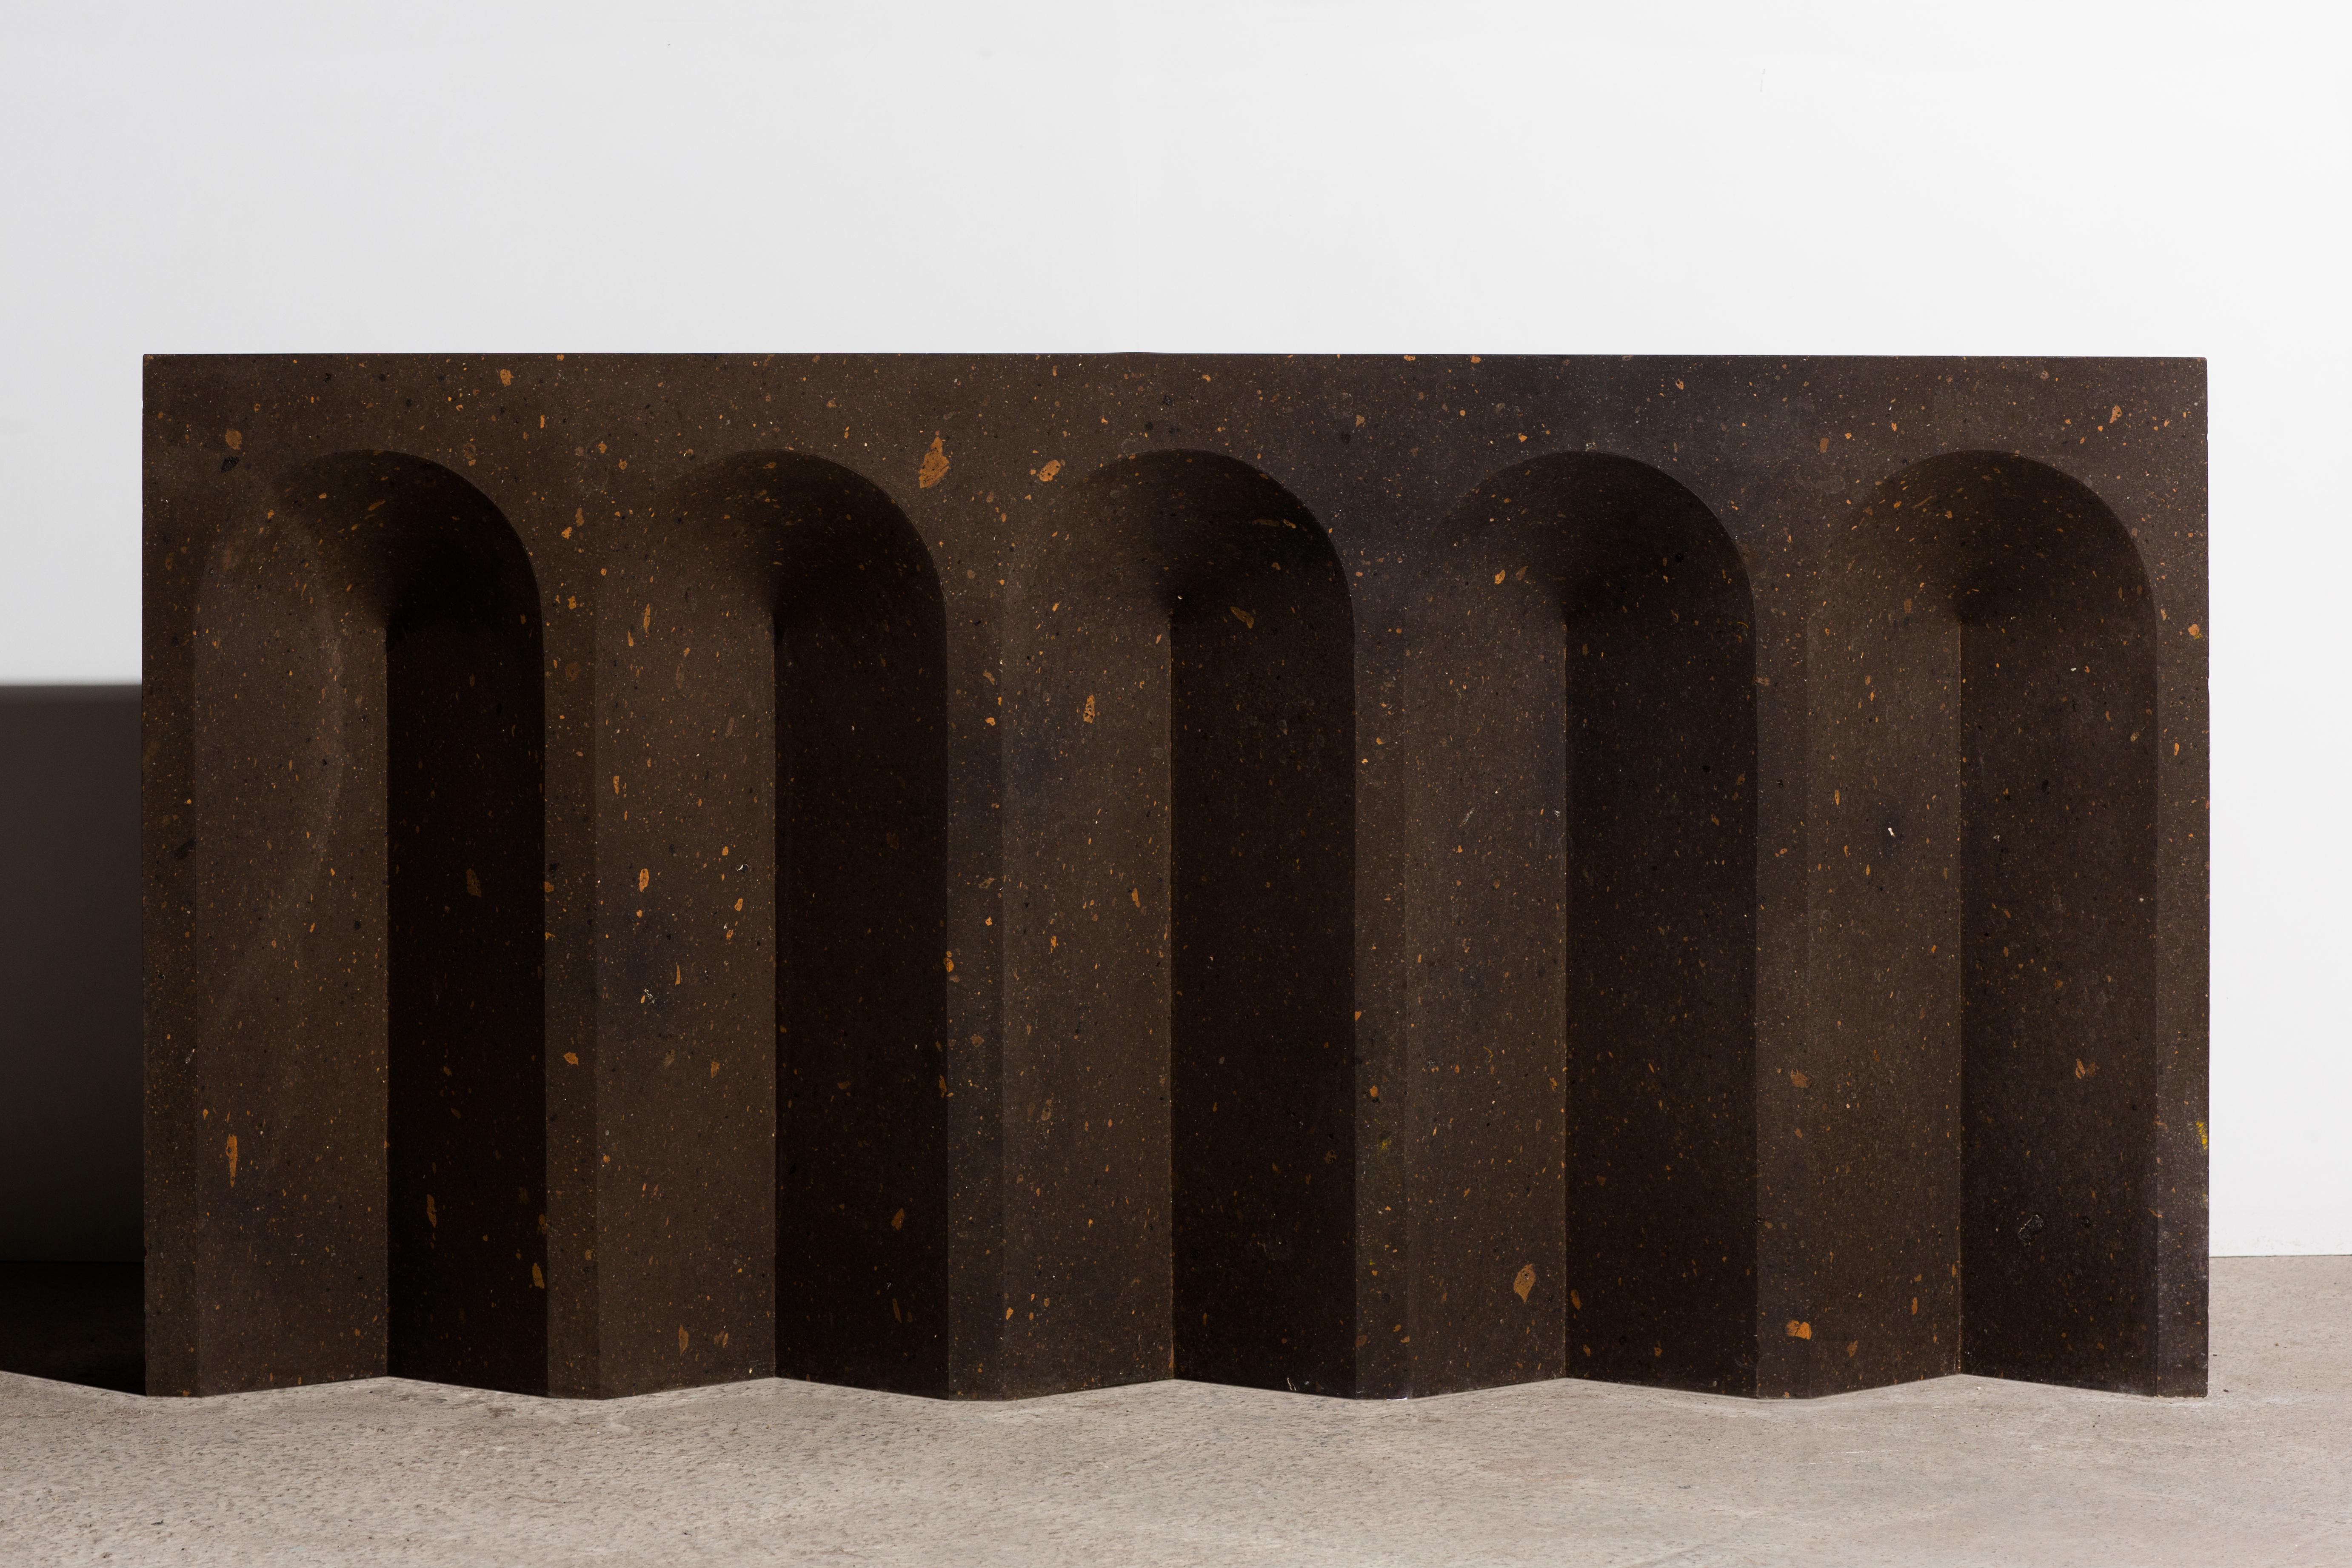 The source console table No.2 by A Space
Dimensions: D 160 x W 80 x H 25 5cm
Materials: Black tuff.
Weight: 290 kg

Inspired by antiquity, material, craftsmanship and architecture of Armenia, this collection consists of 12 limited edition